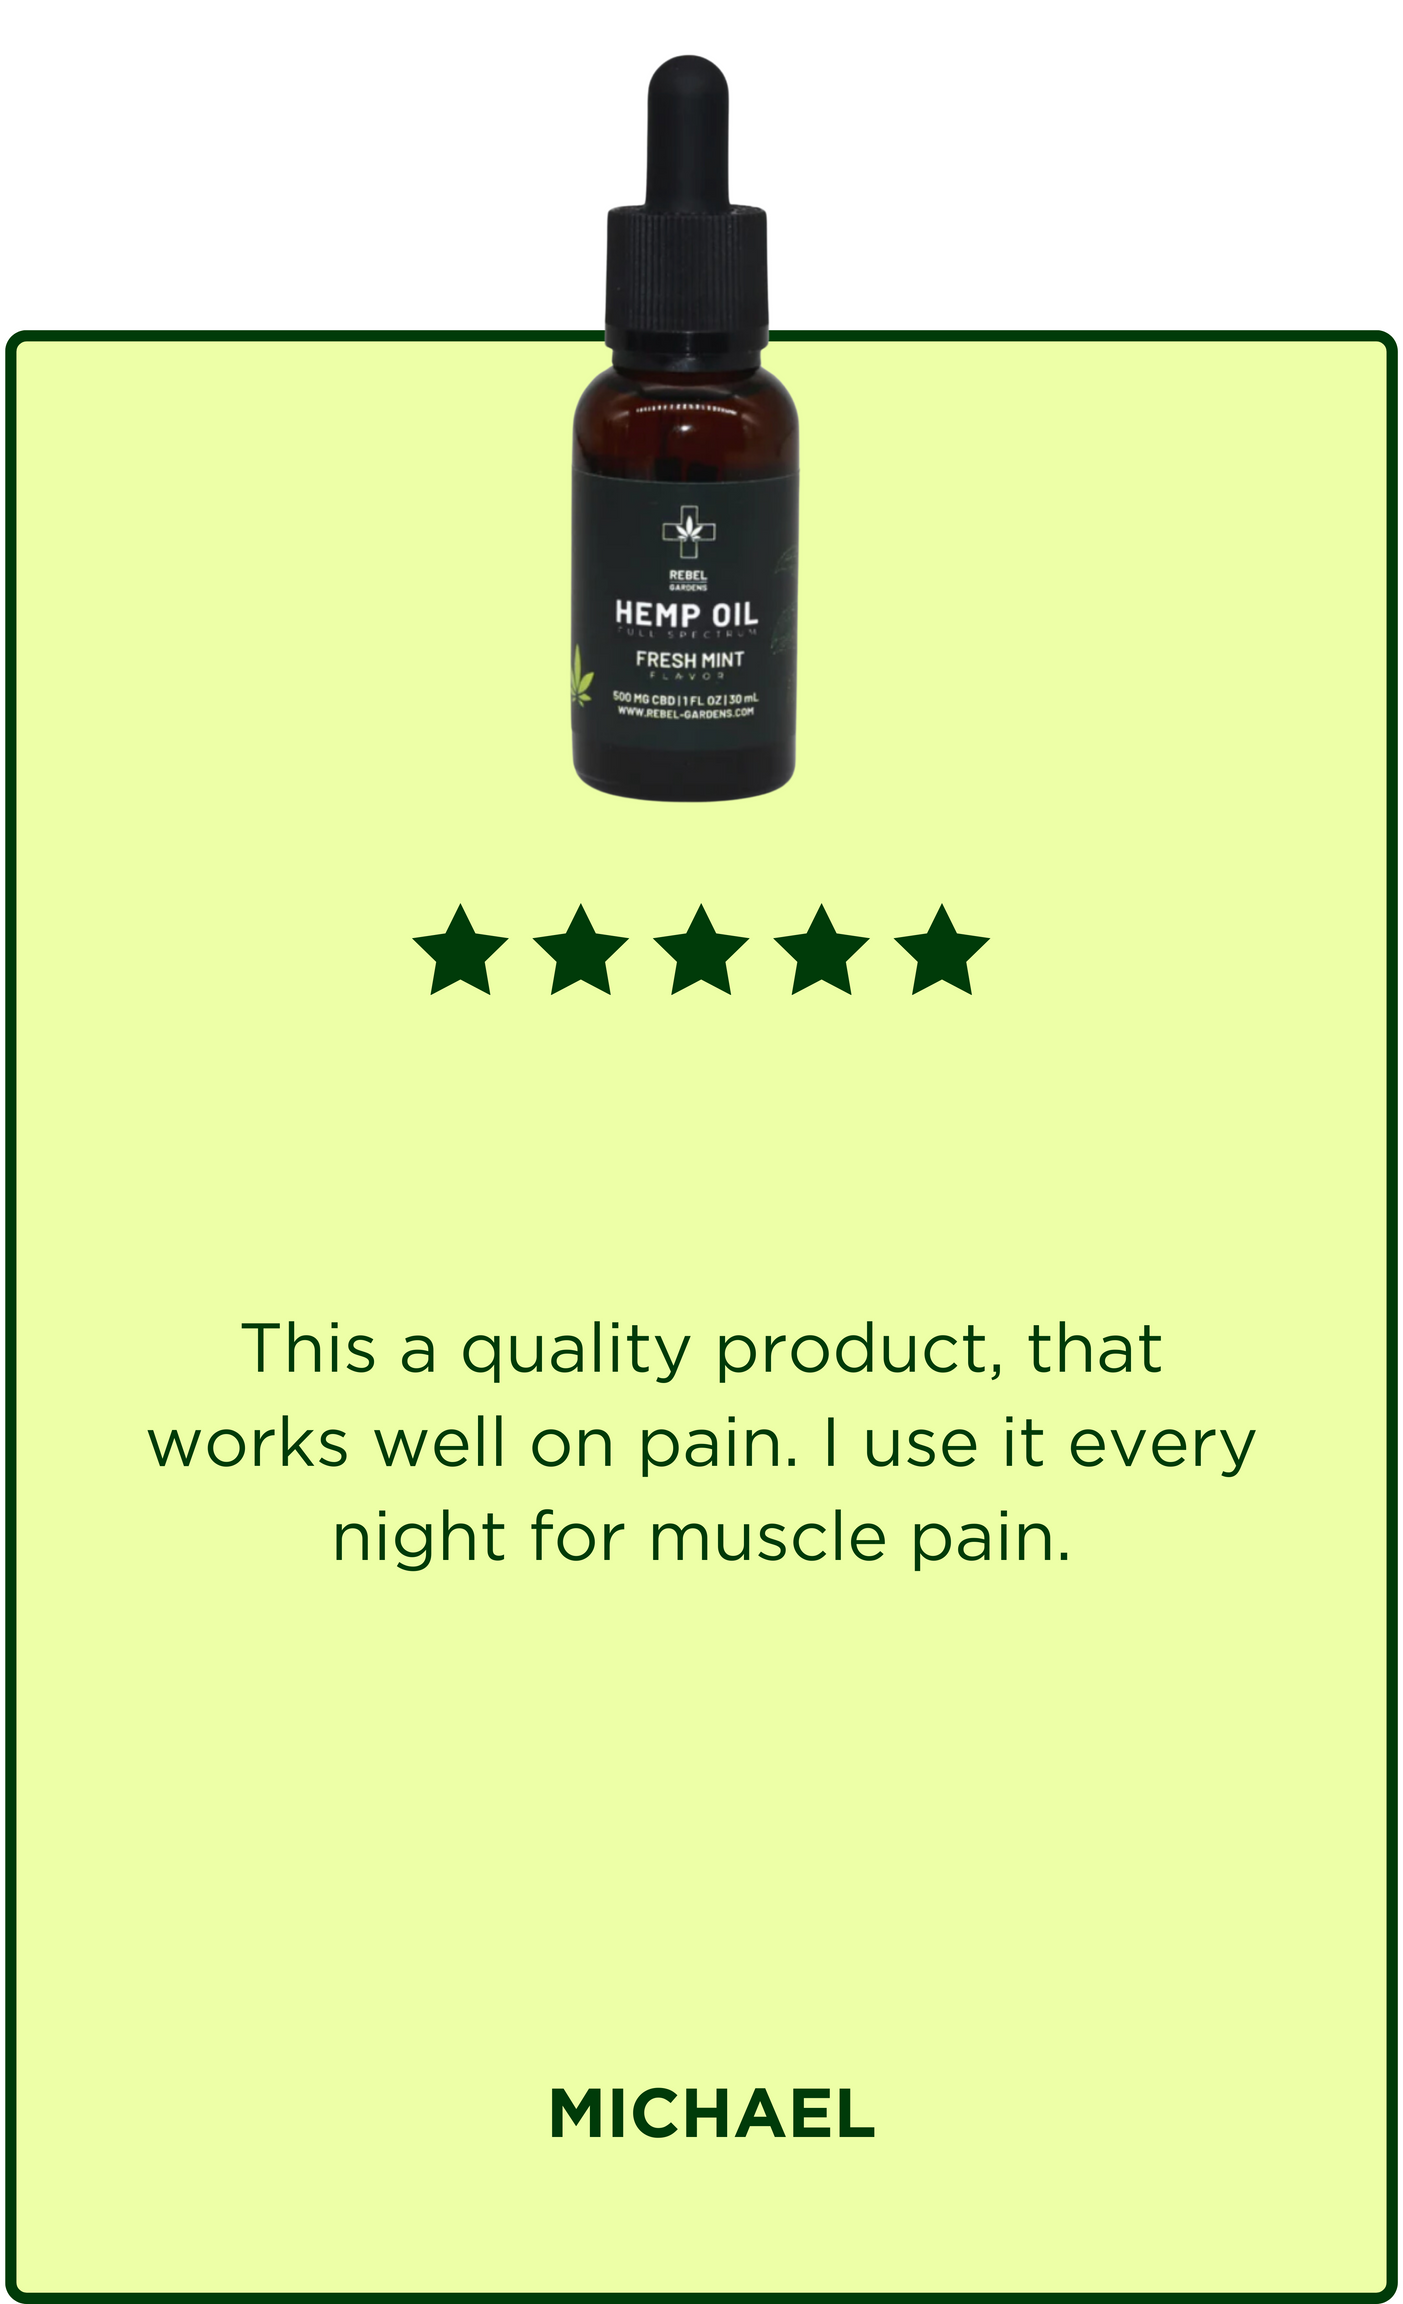 Hemp Oil Testimonial - This is a quality product, that works well on pain. I use every night for muscle pain